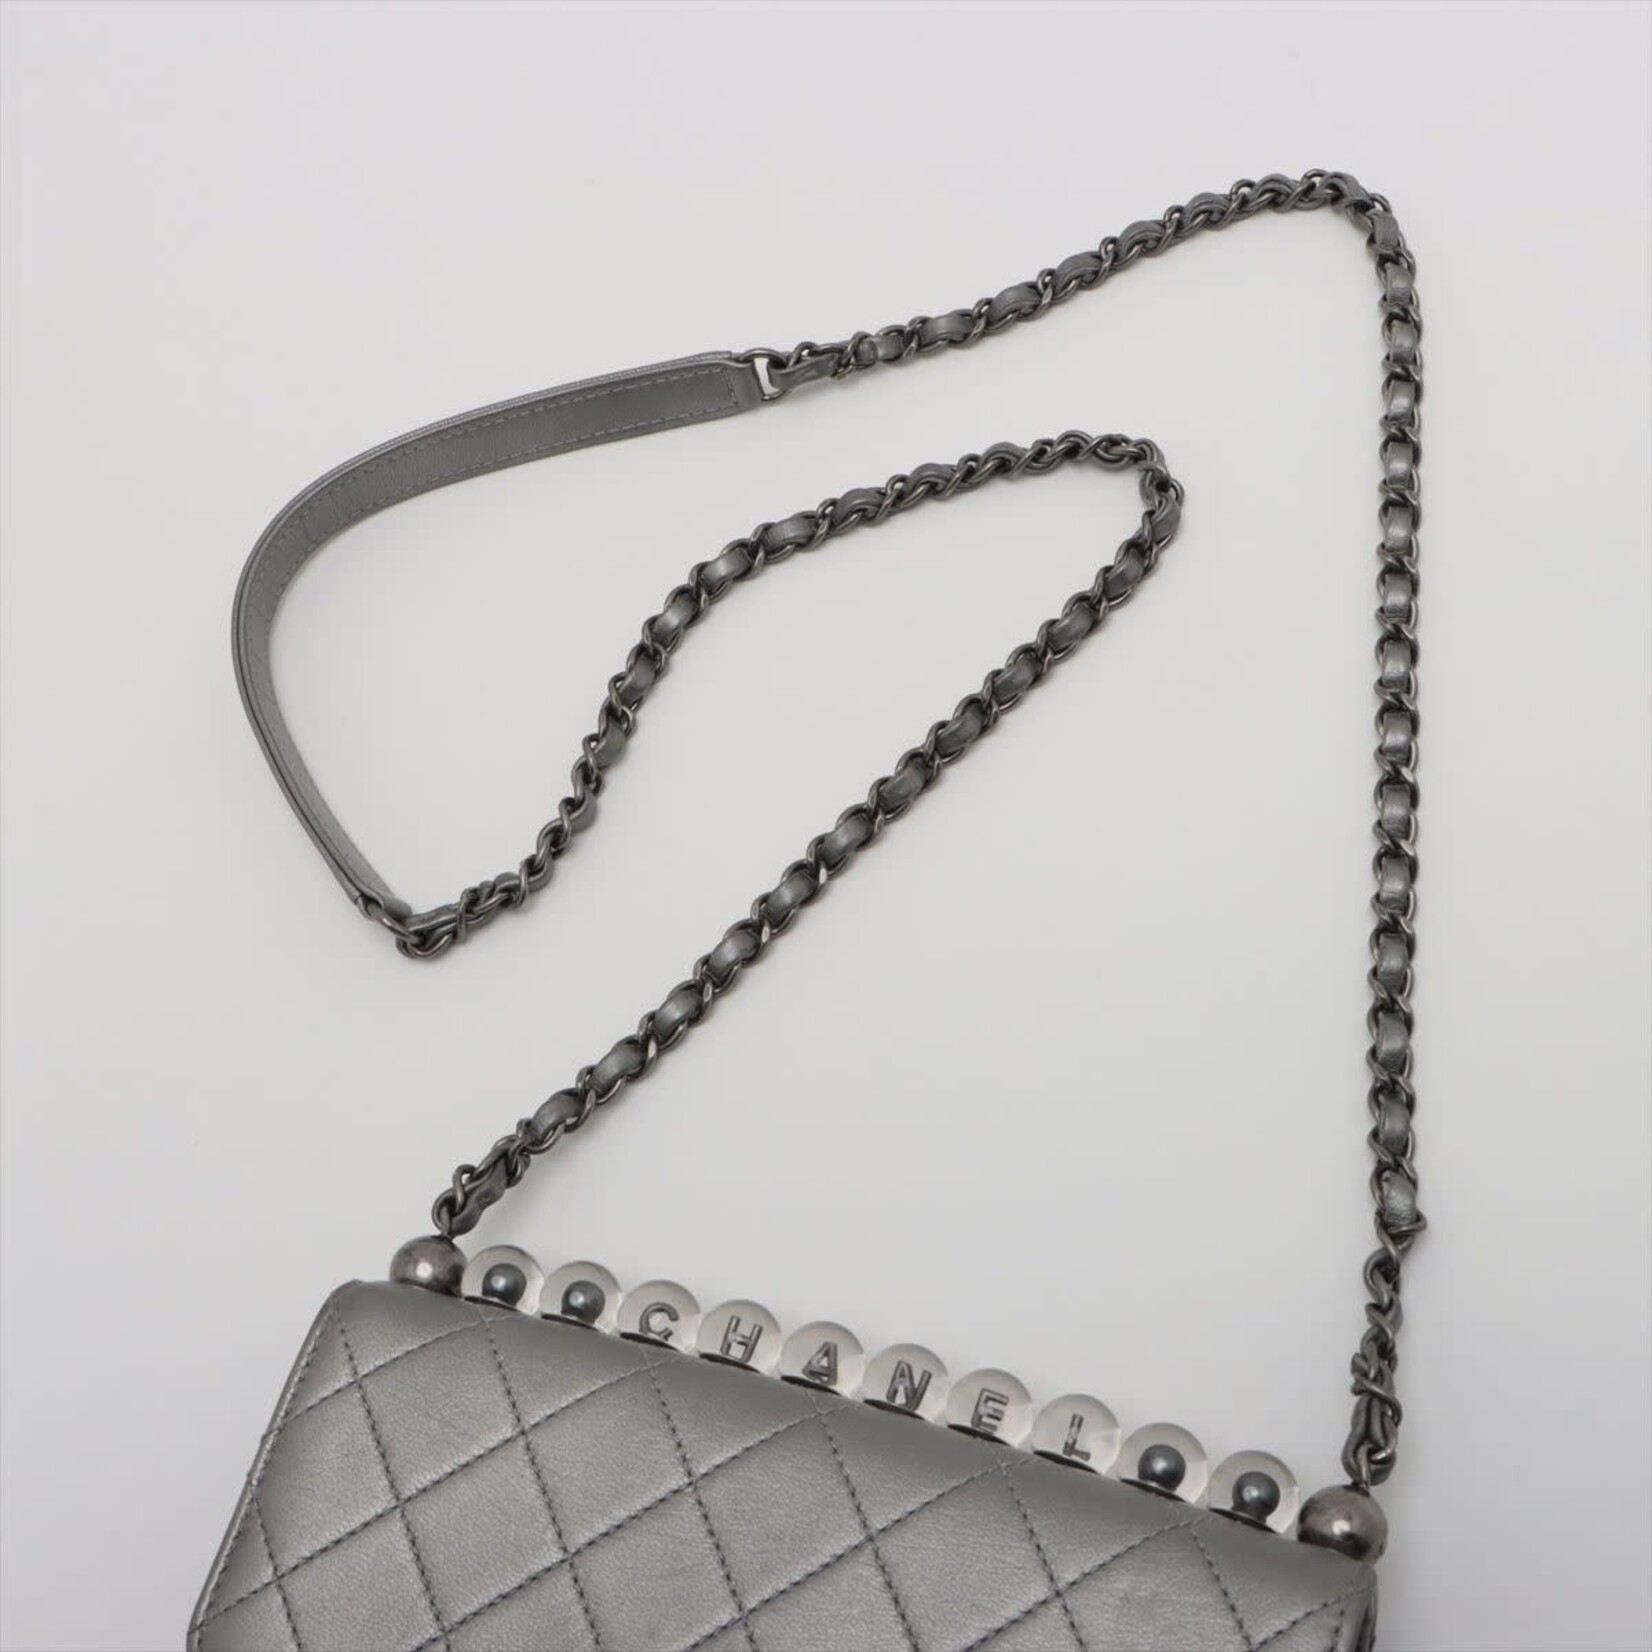 Authentic Chanel Quilted Chain Shoulder Bag